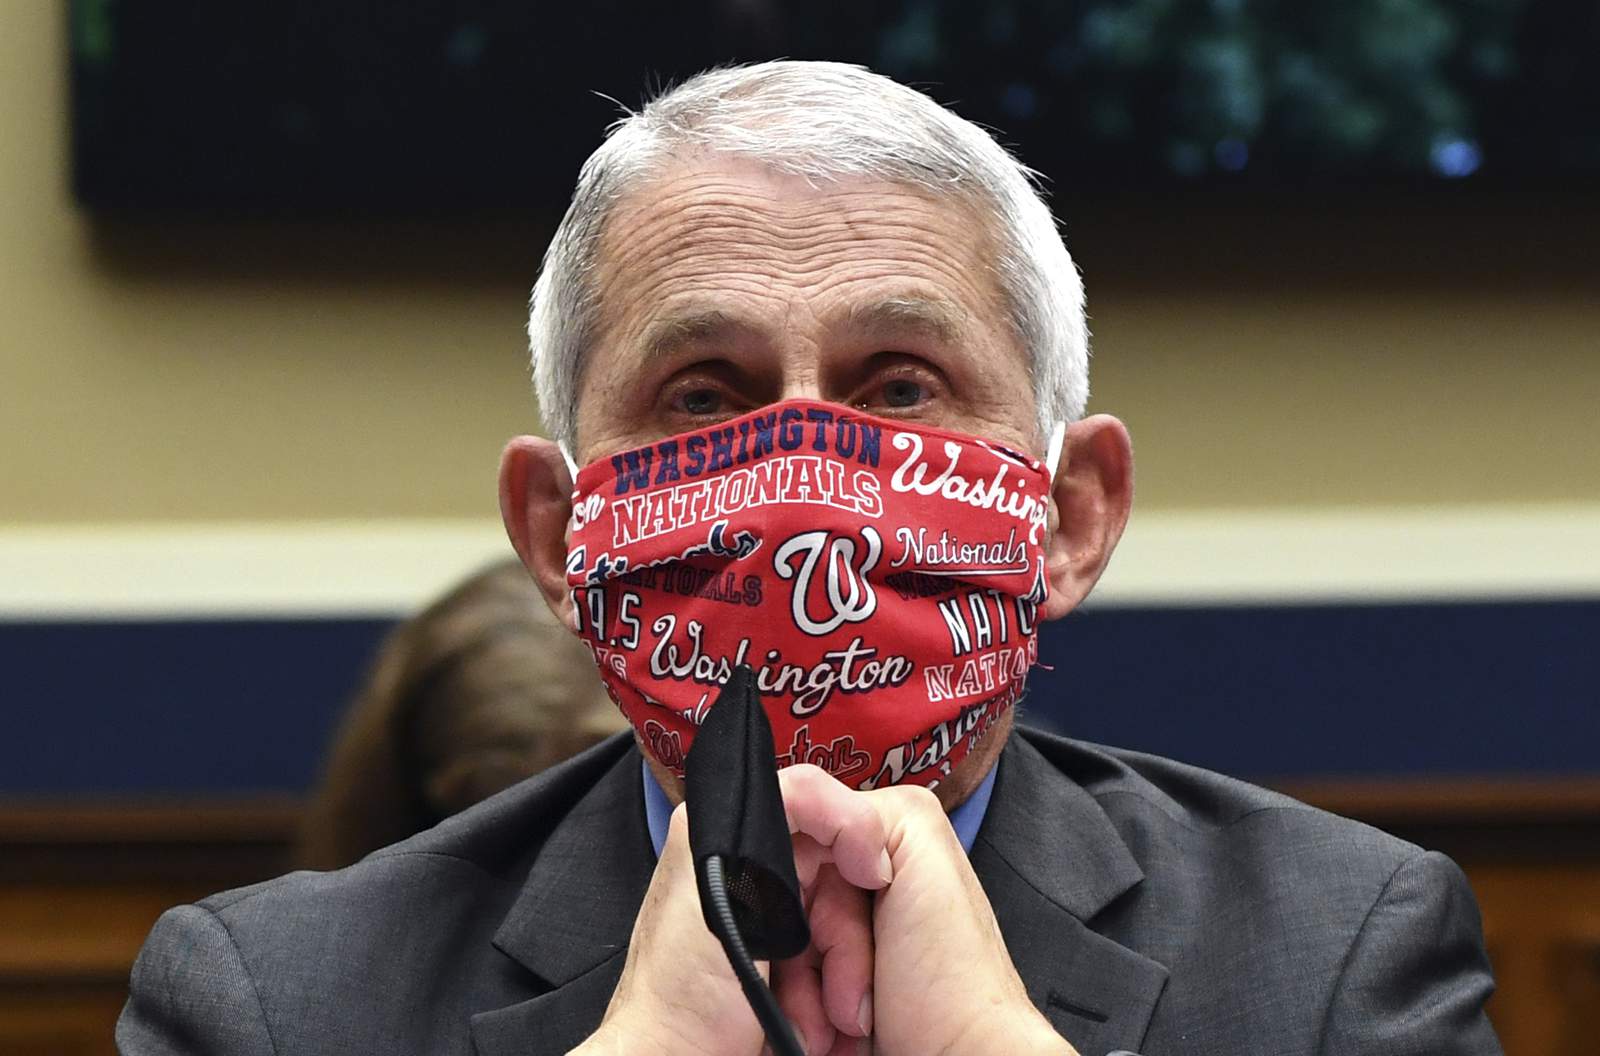 Fauci's plea 'Wear a mask' tops list of 2020 notable quotes